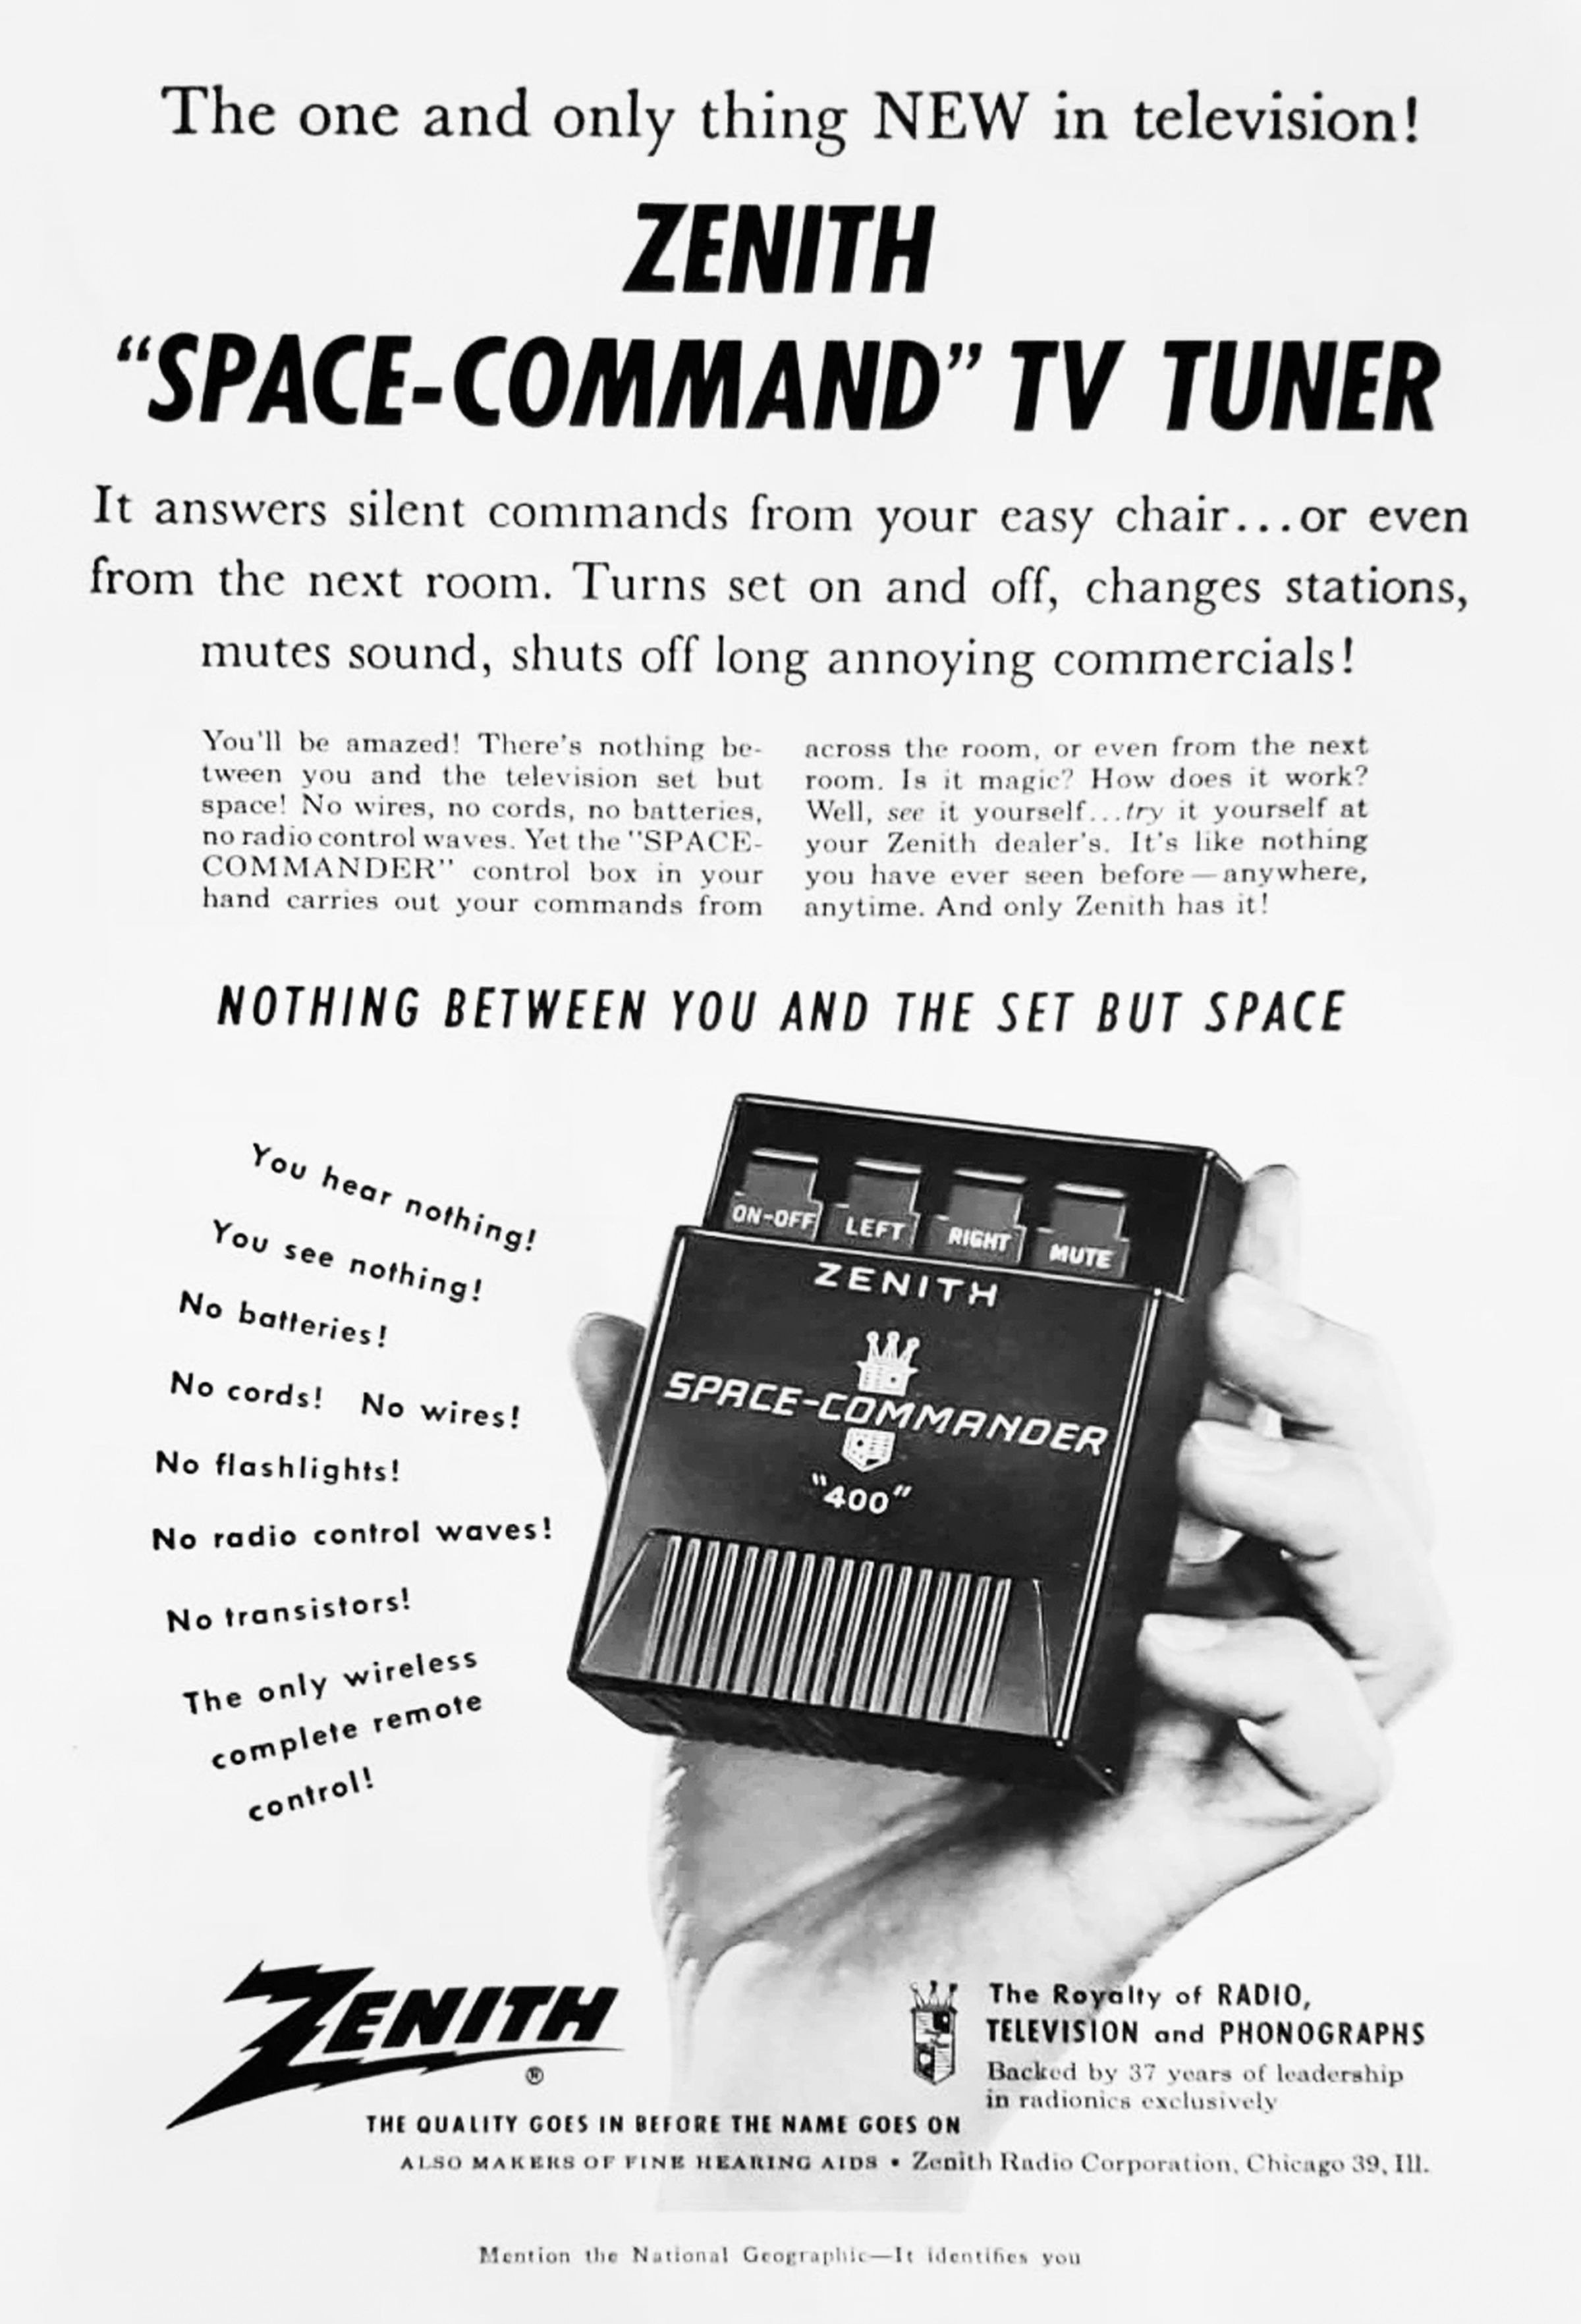 An advertisement for the original Zenith Space Command model, stating, “Nothing between you and the set but space.”